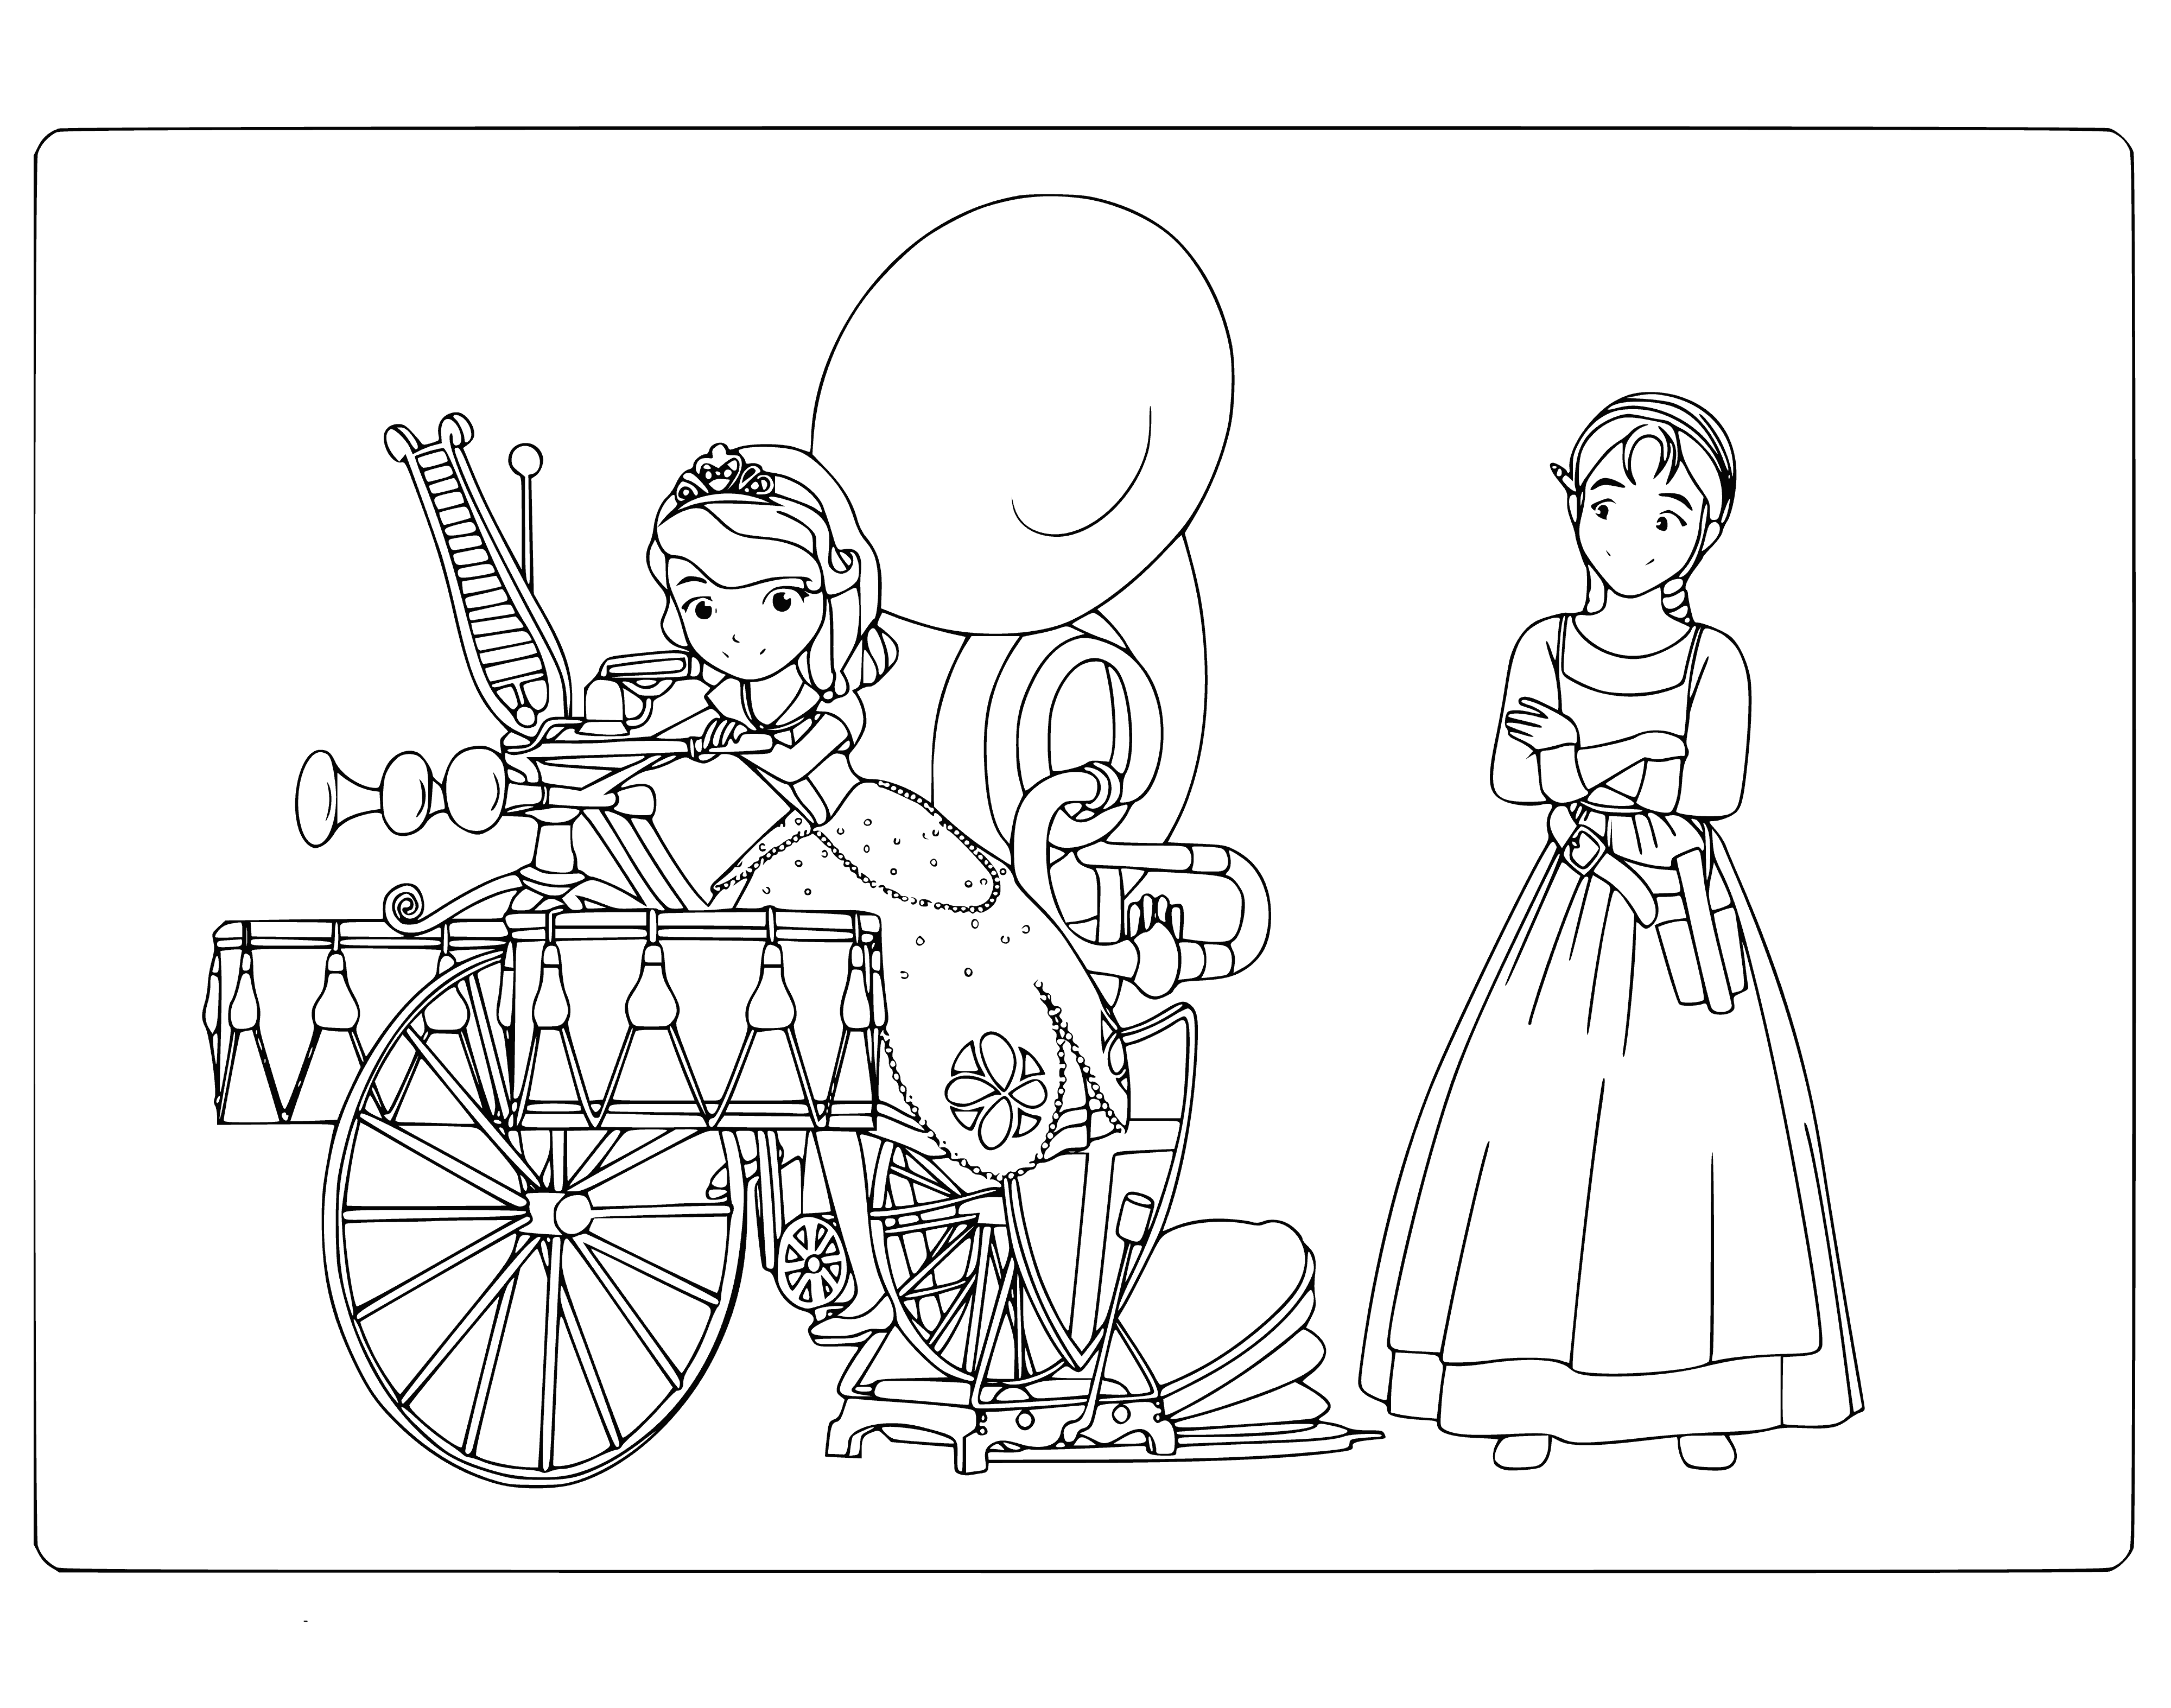 Sofia and the inventor Gwen coloring page